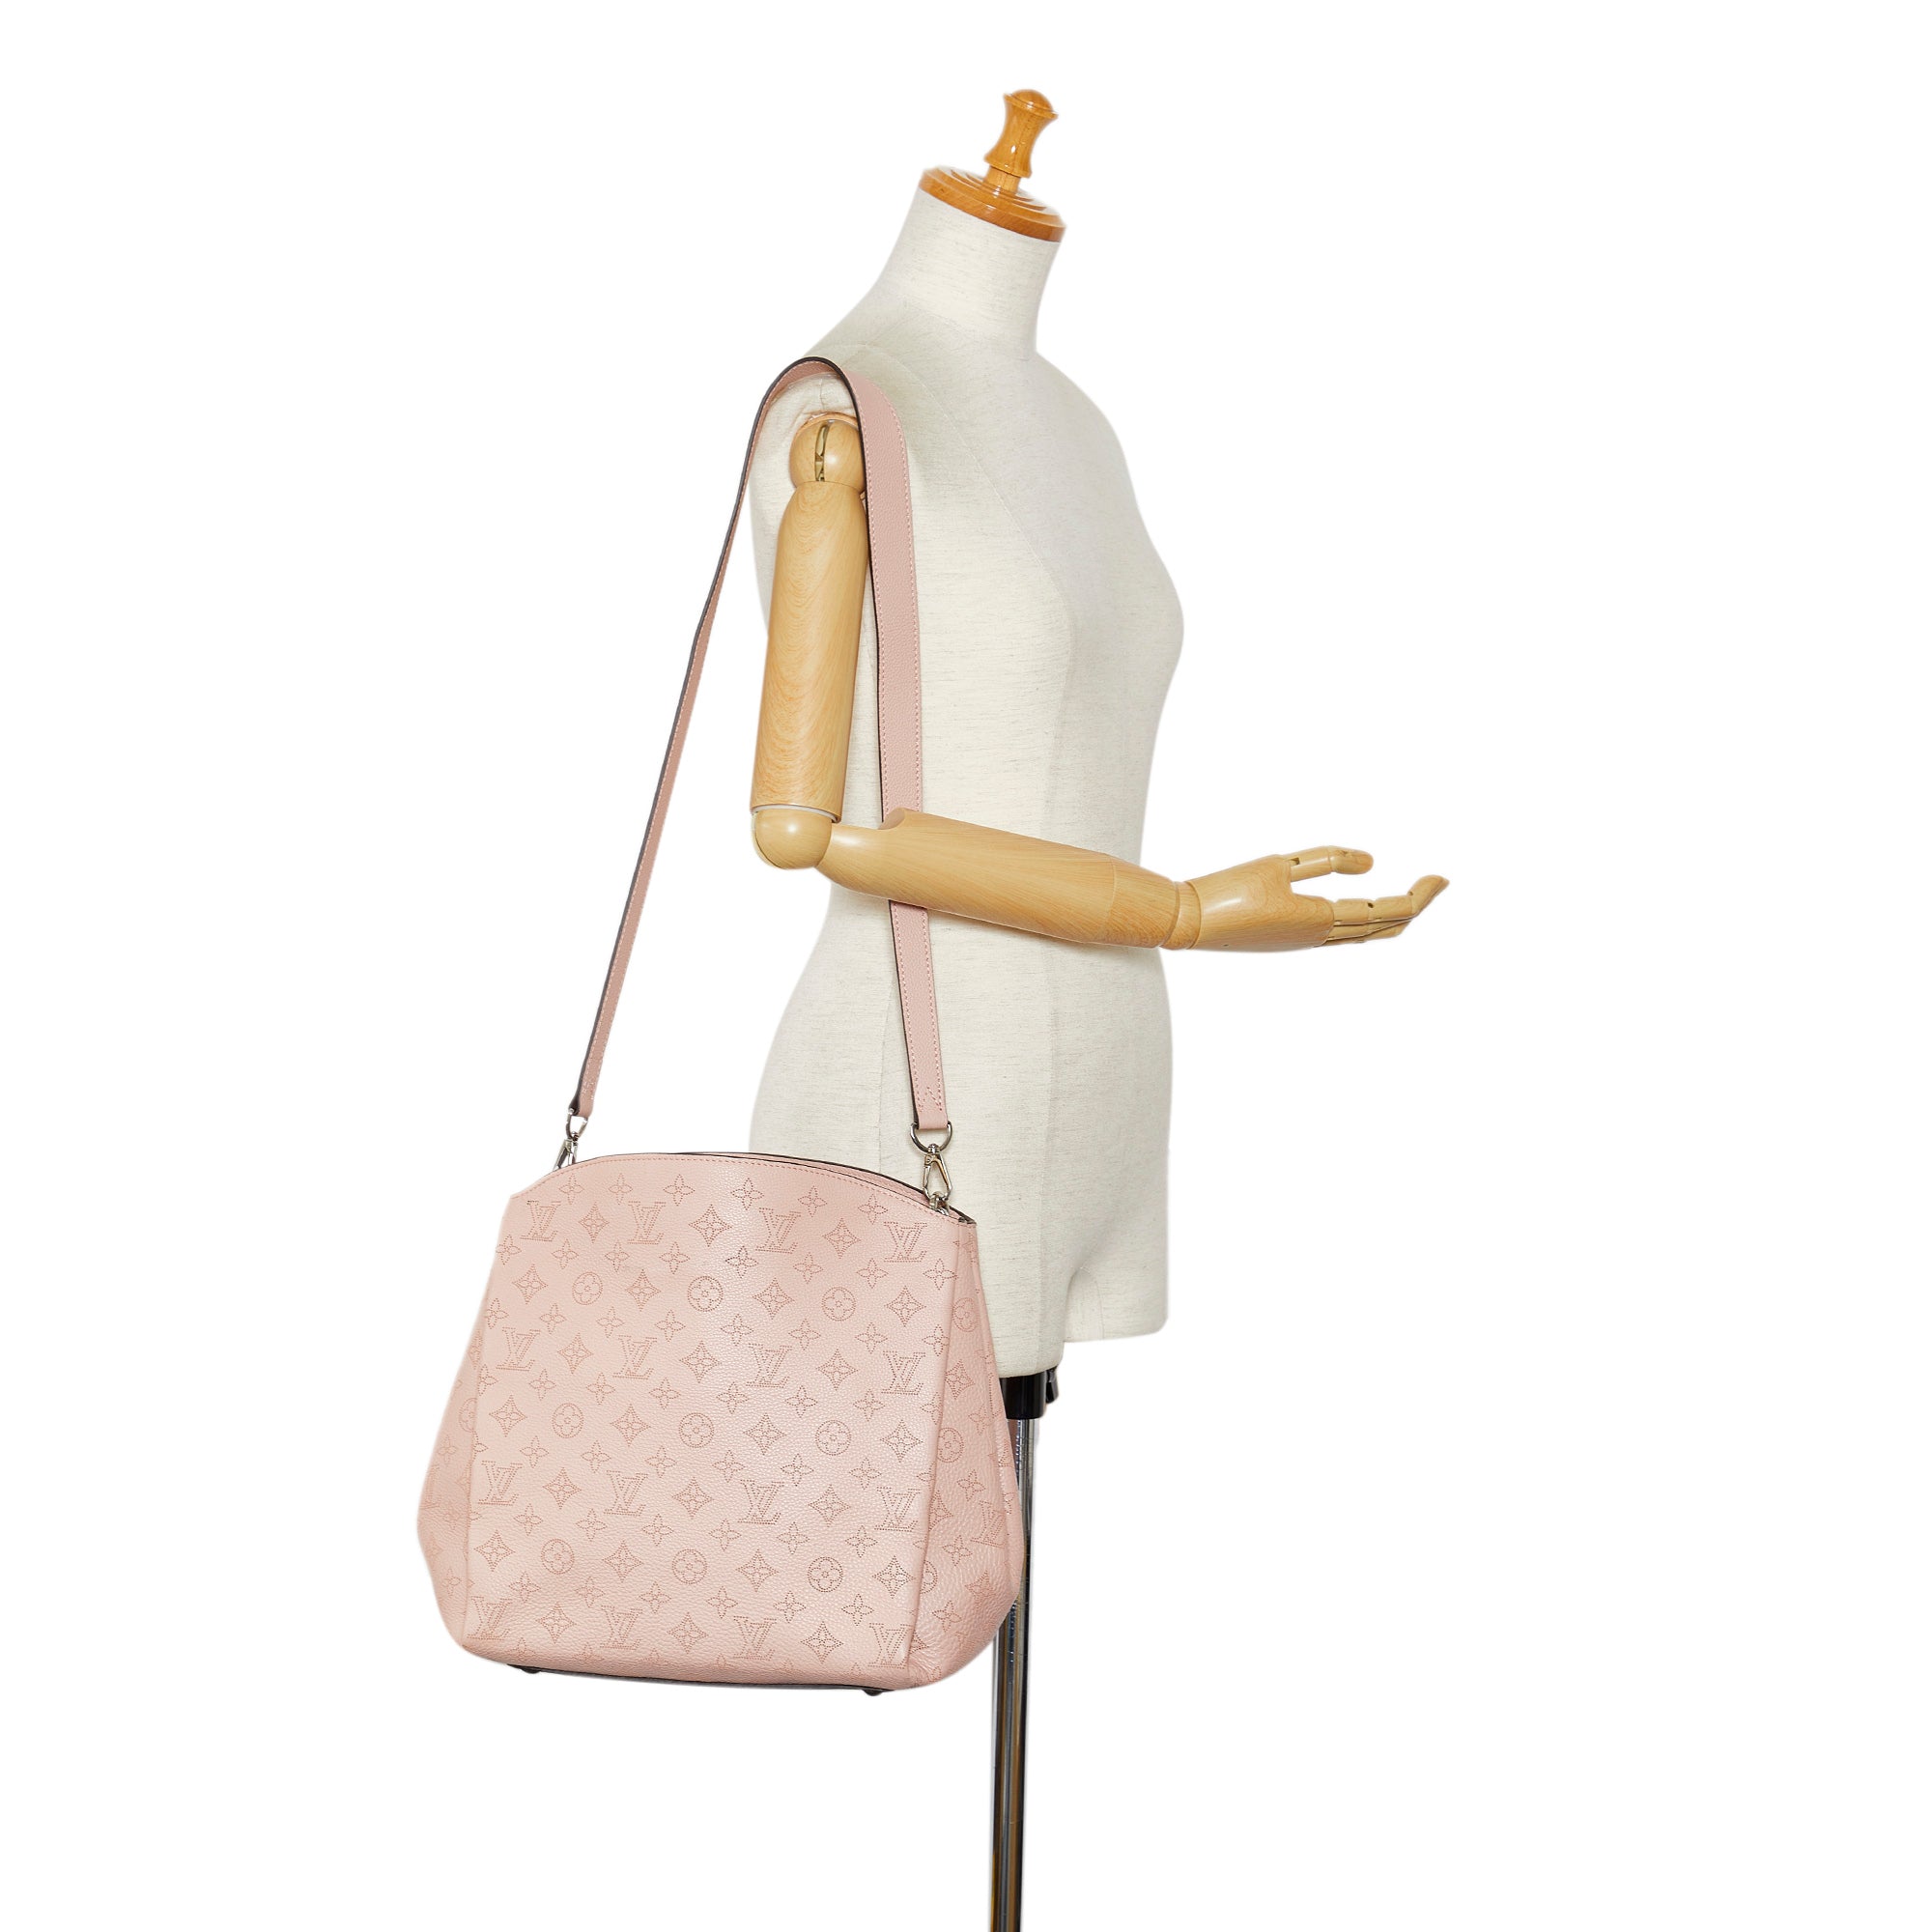 LOUIS VUITTON Babylone Mahina Leather Shoulder Bag Pink. 100% Authentic.